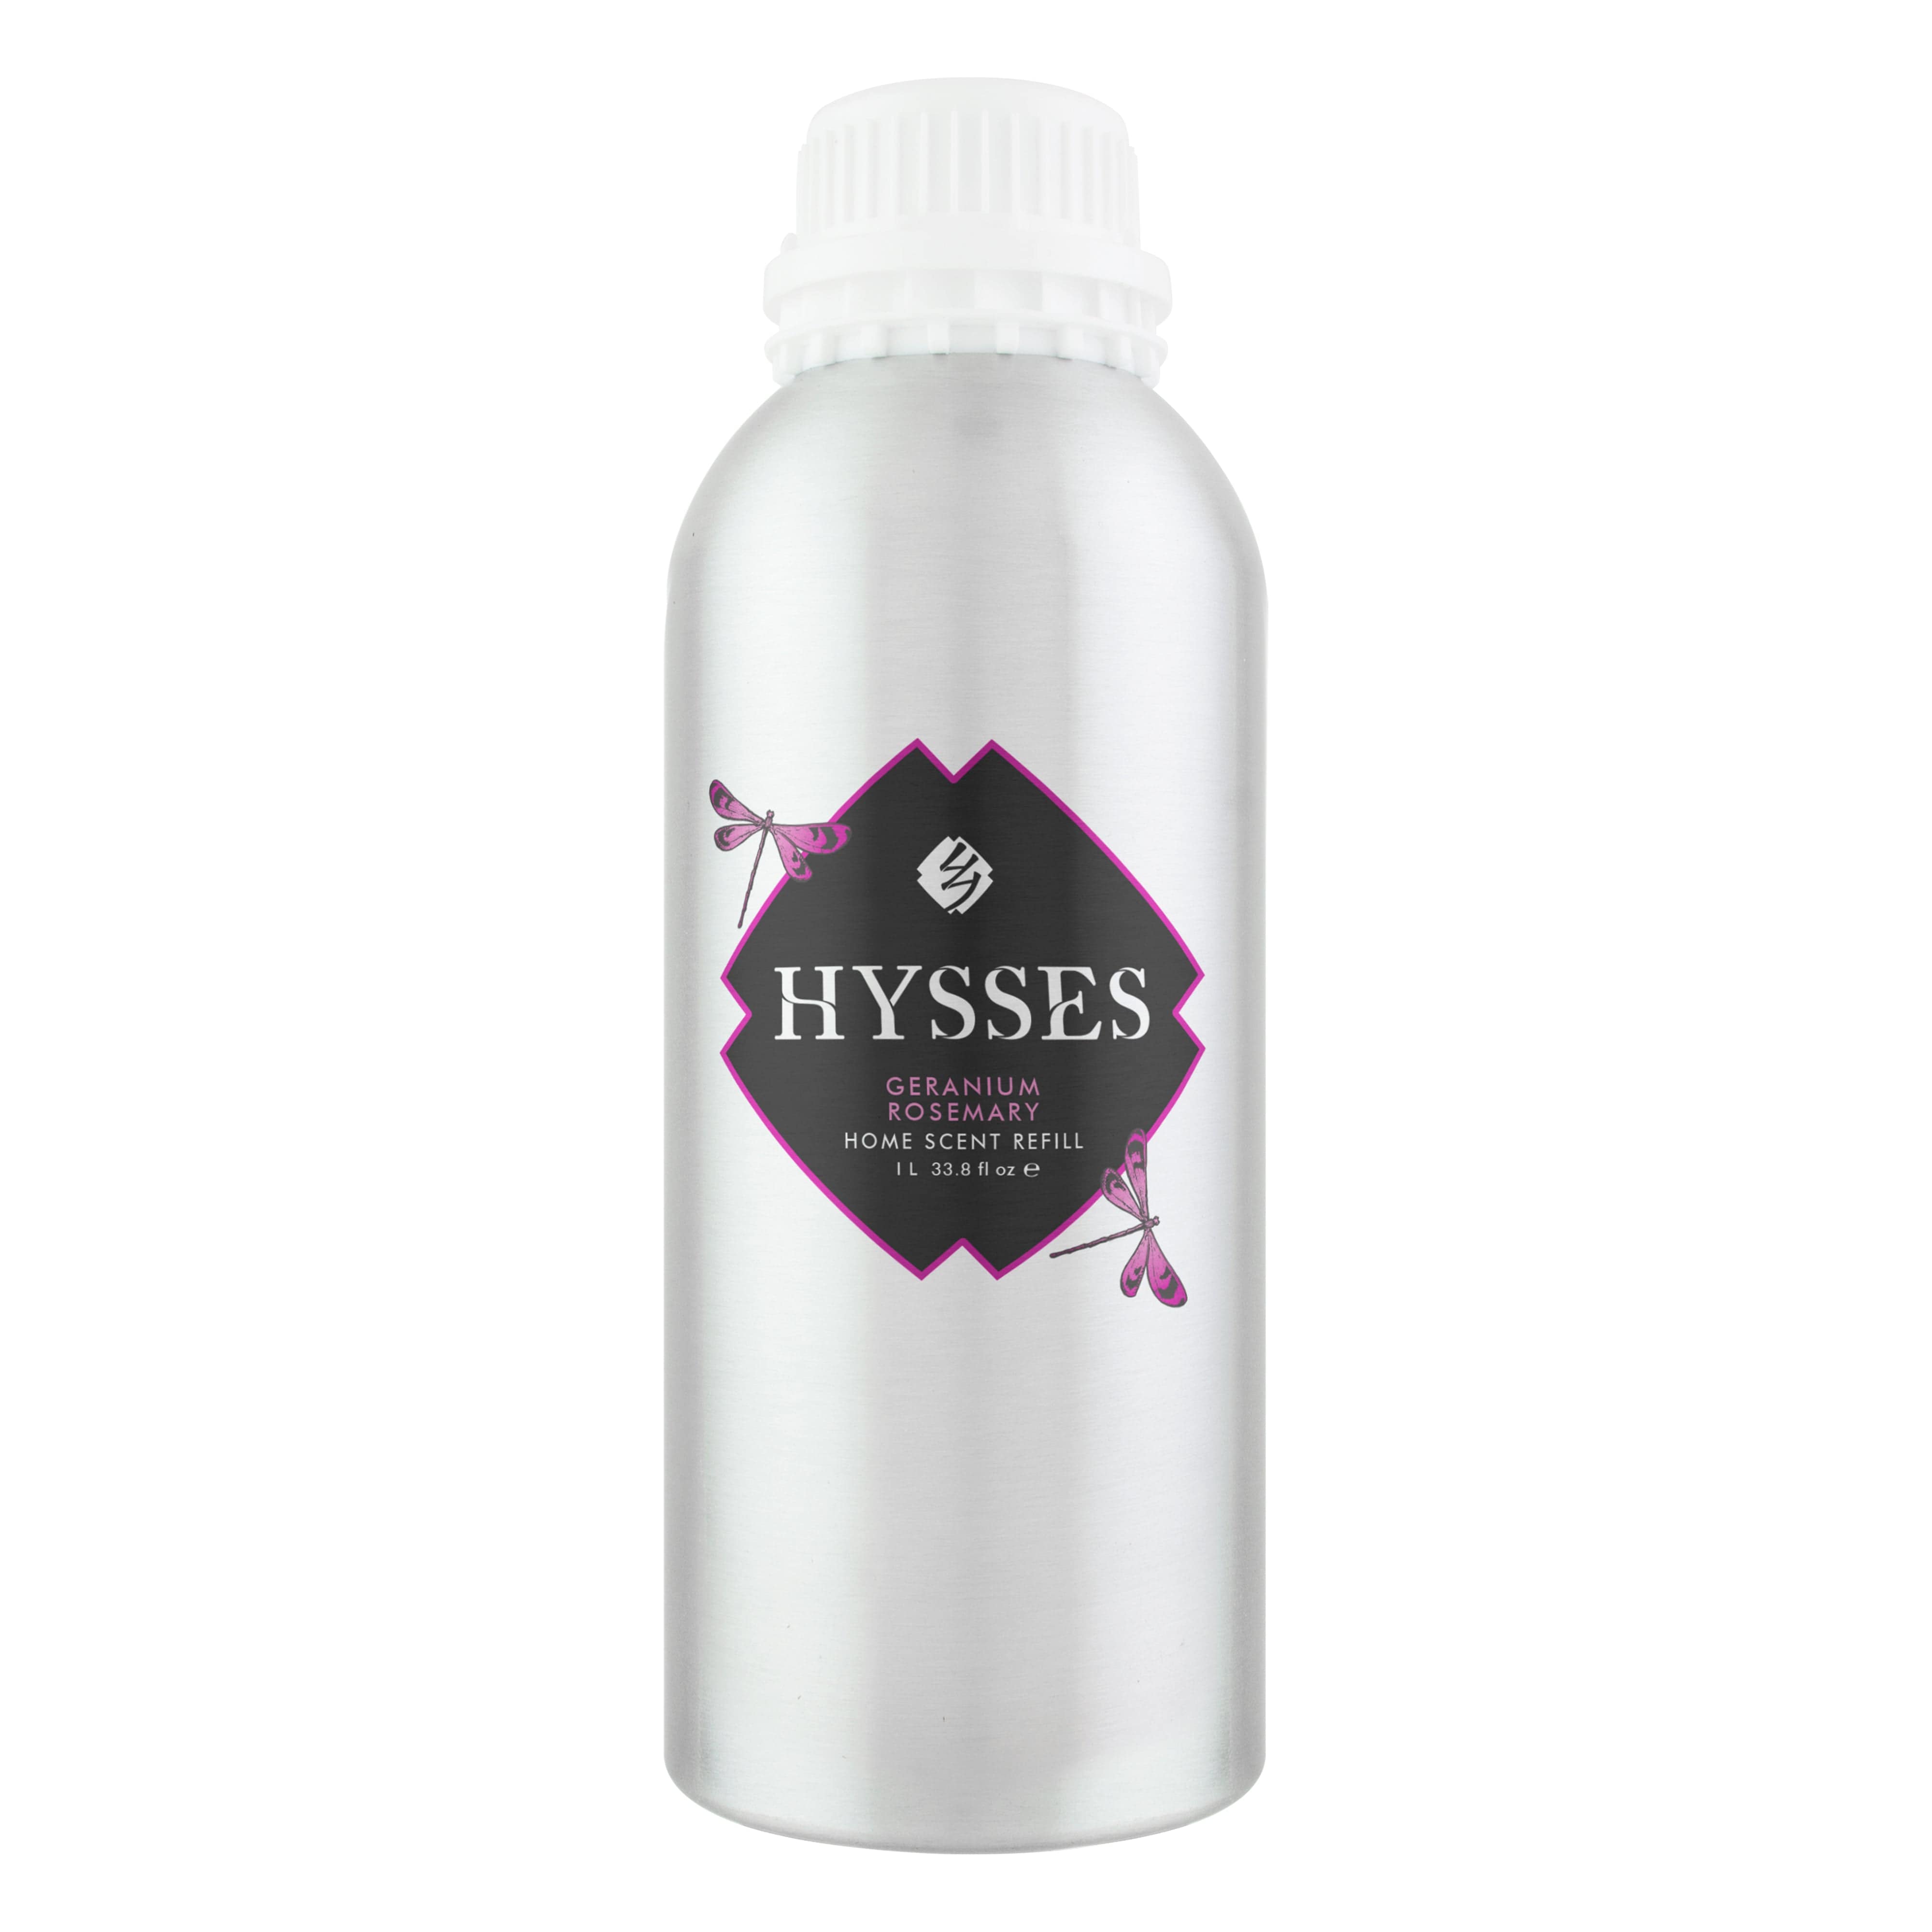 Hysses Home Scents 1000ml Refill Home Scent Reed Diffuser Geranium Rosemary